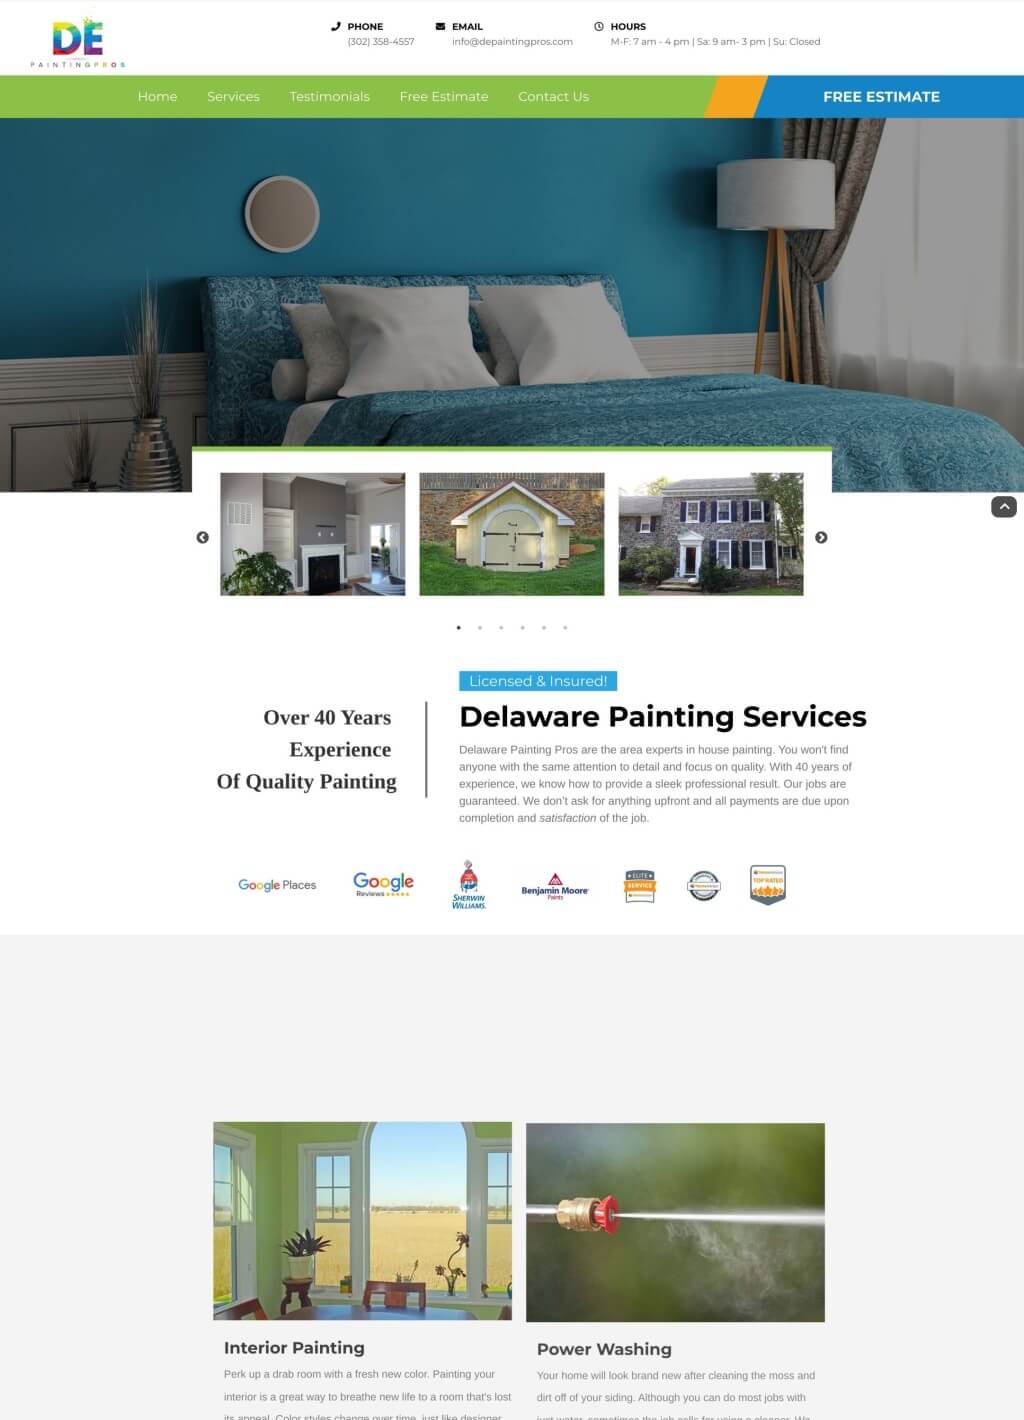 Website of a painting company